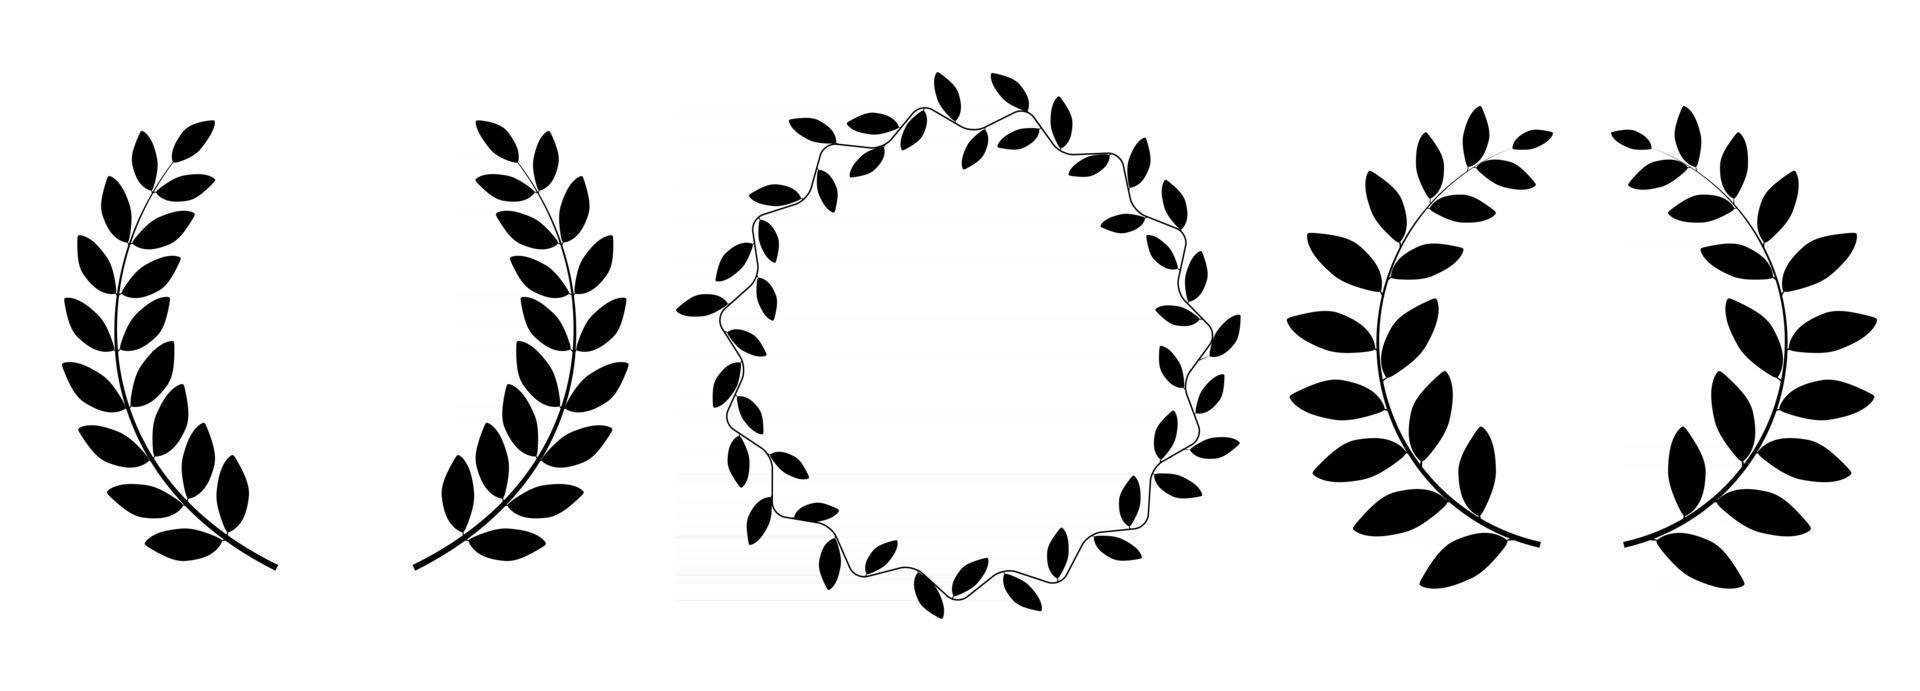 Laurel wreath silhouette collection set isolated on white background. Vector Illustration